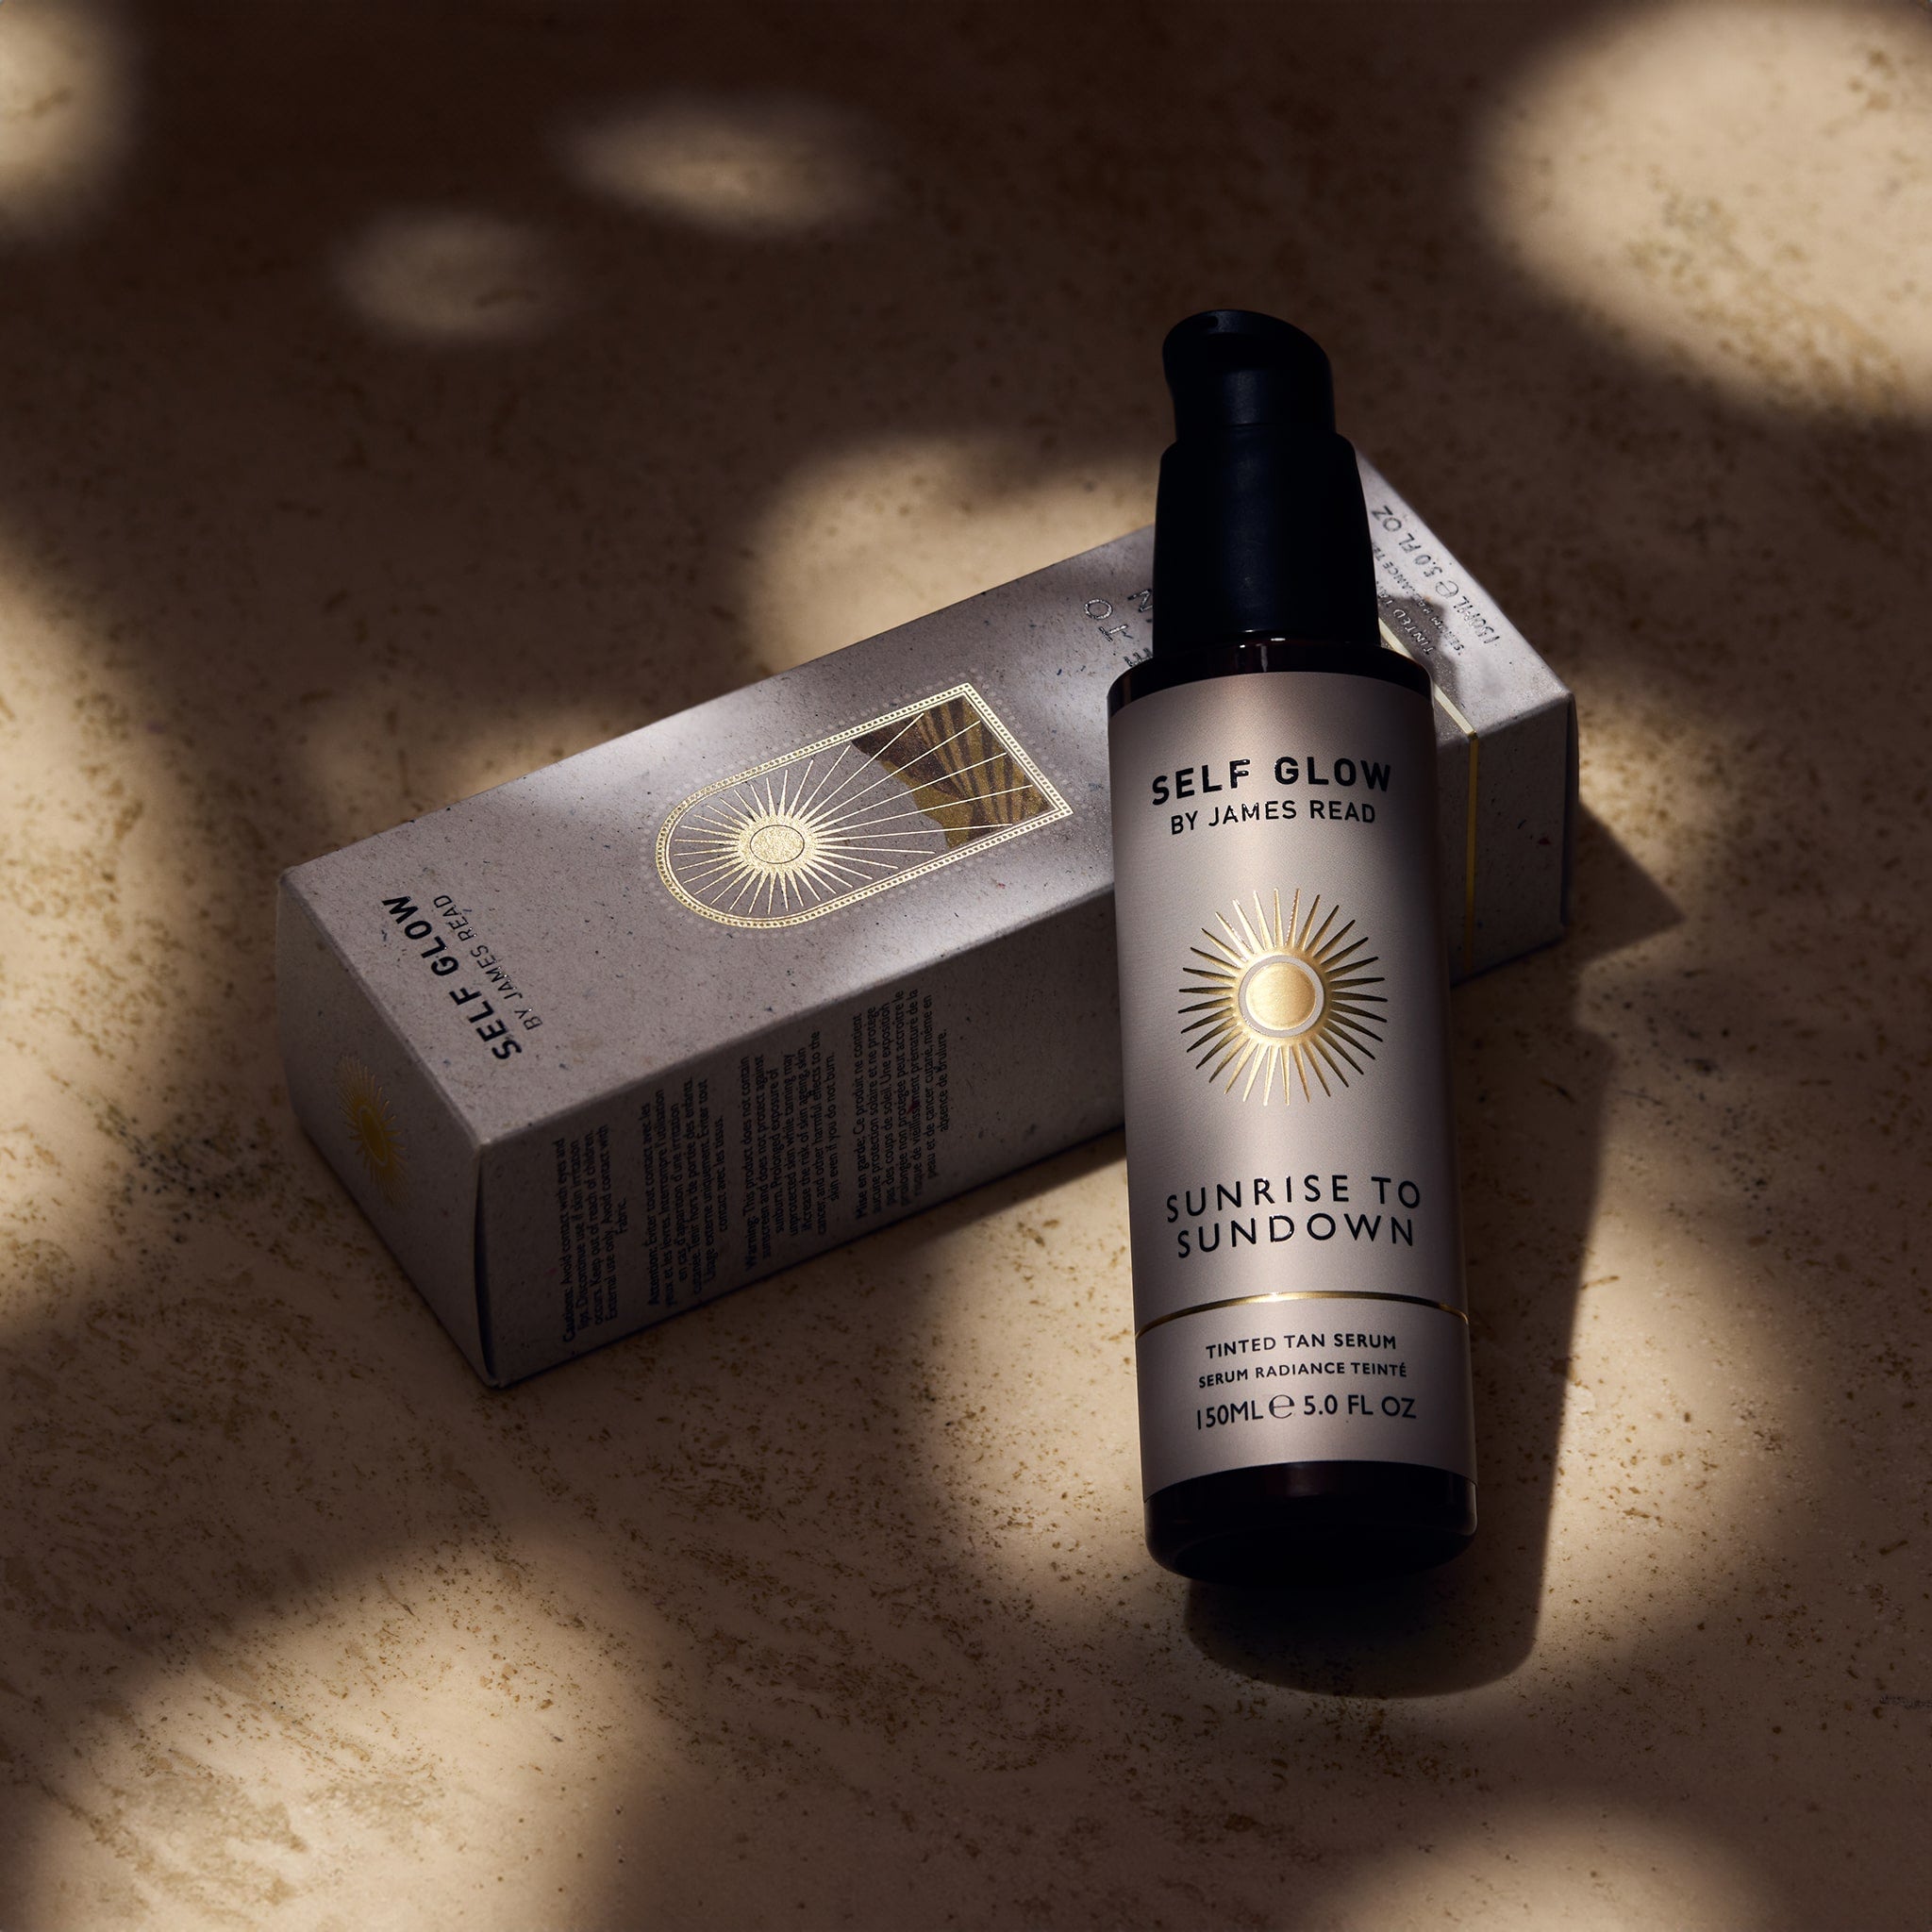 Self Glow by James Read Sunrise to Sundown Tinted Tan Serum recyclable glass bottle leaning against a recycled cardboard box with vegetable-based inks and eco-friendly packaging, showcased under dappled light.